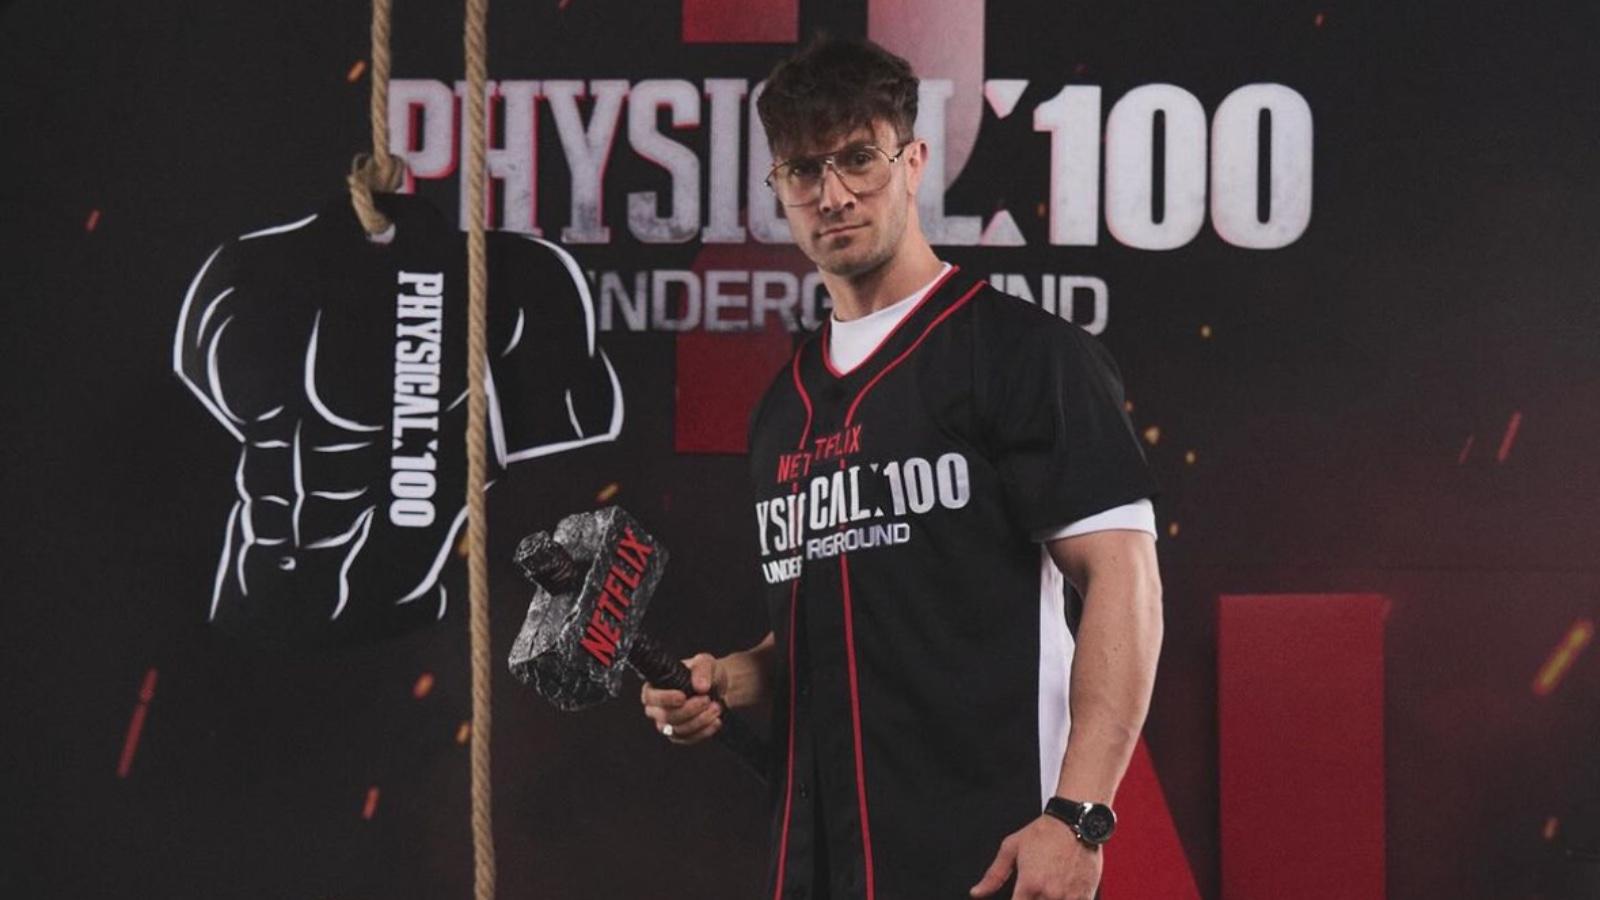 Justin Harvey in Physical 100 Season 2 press event.